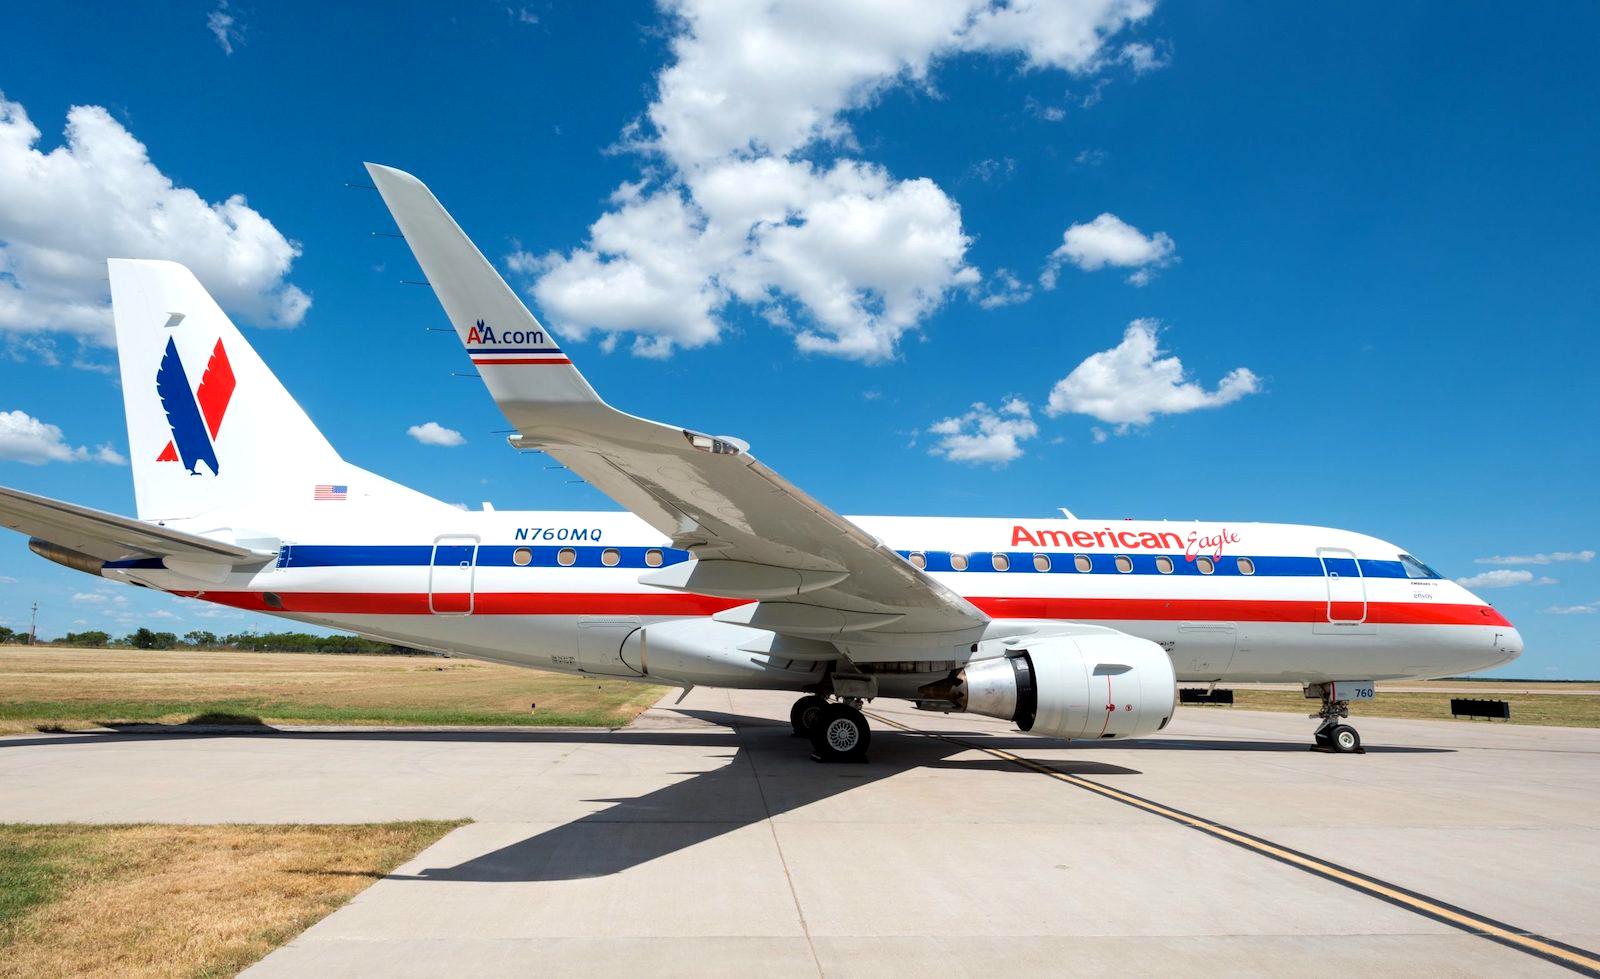 Swoon: American Eagle Heritage Livery Retro Jet